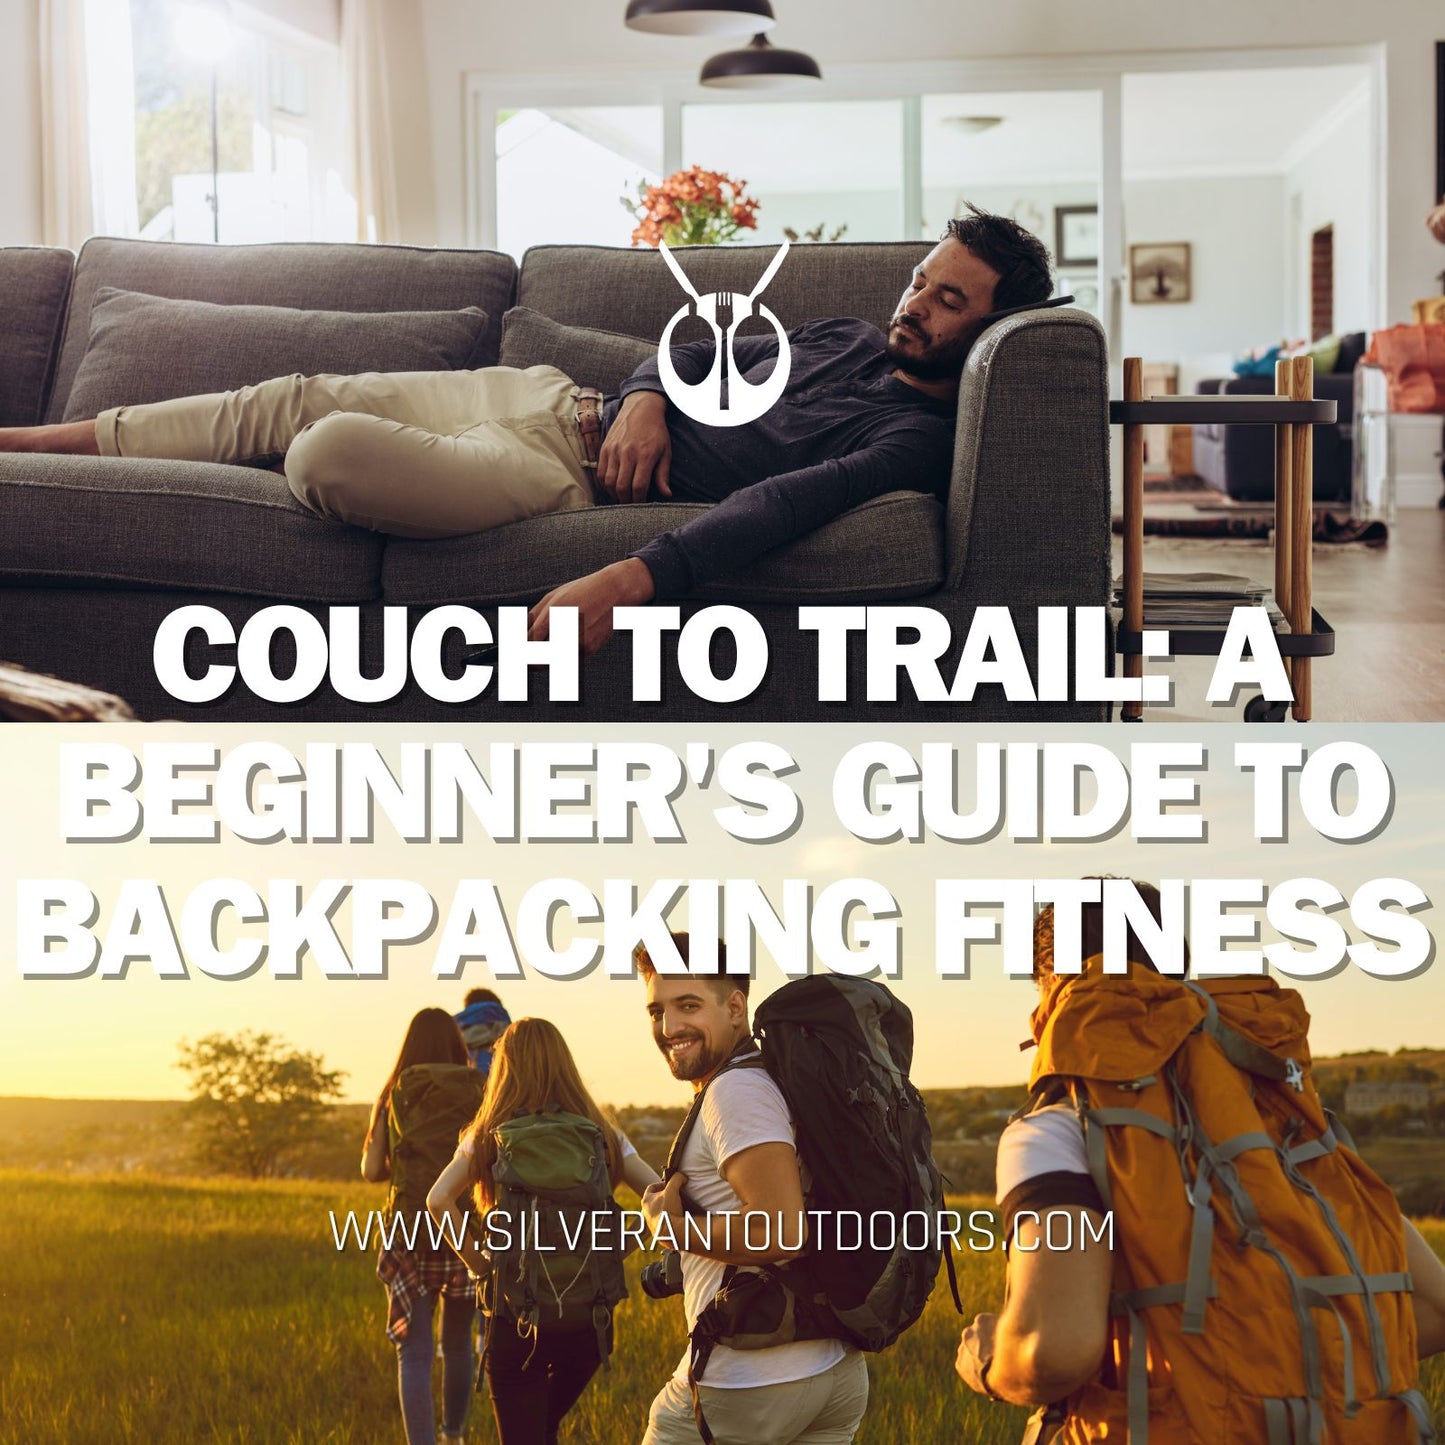 Couch to Trail: A Beginner's Guide to Backpacking Fitness